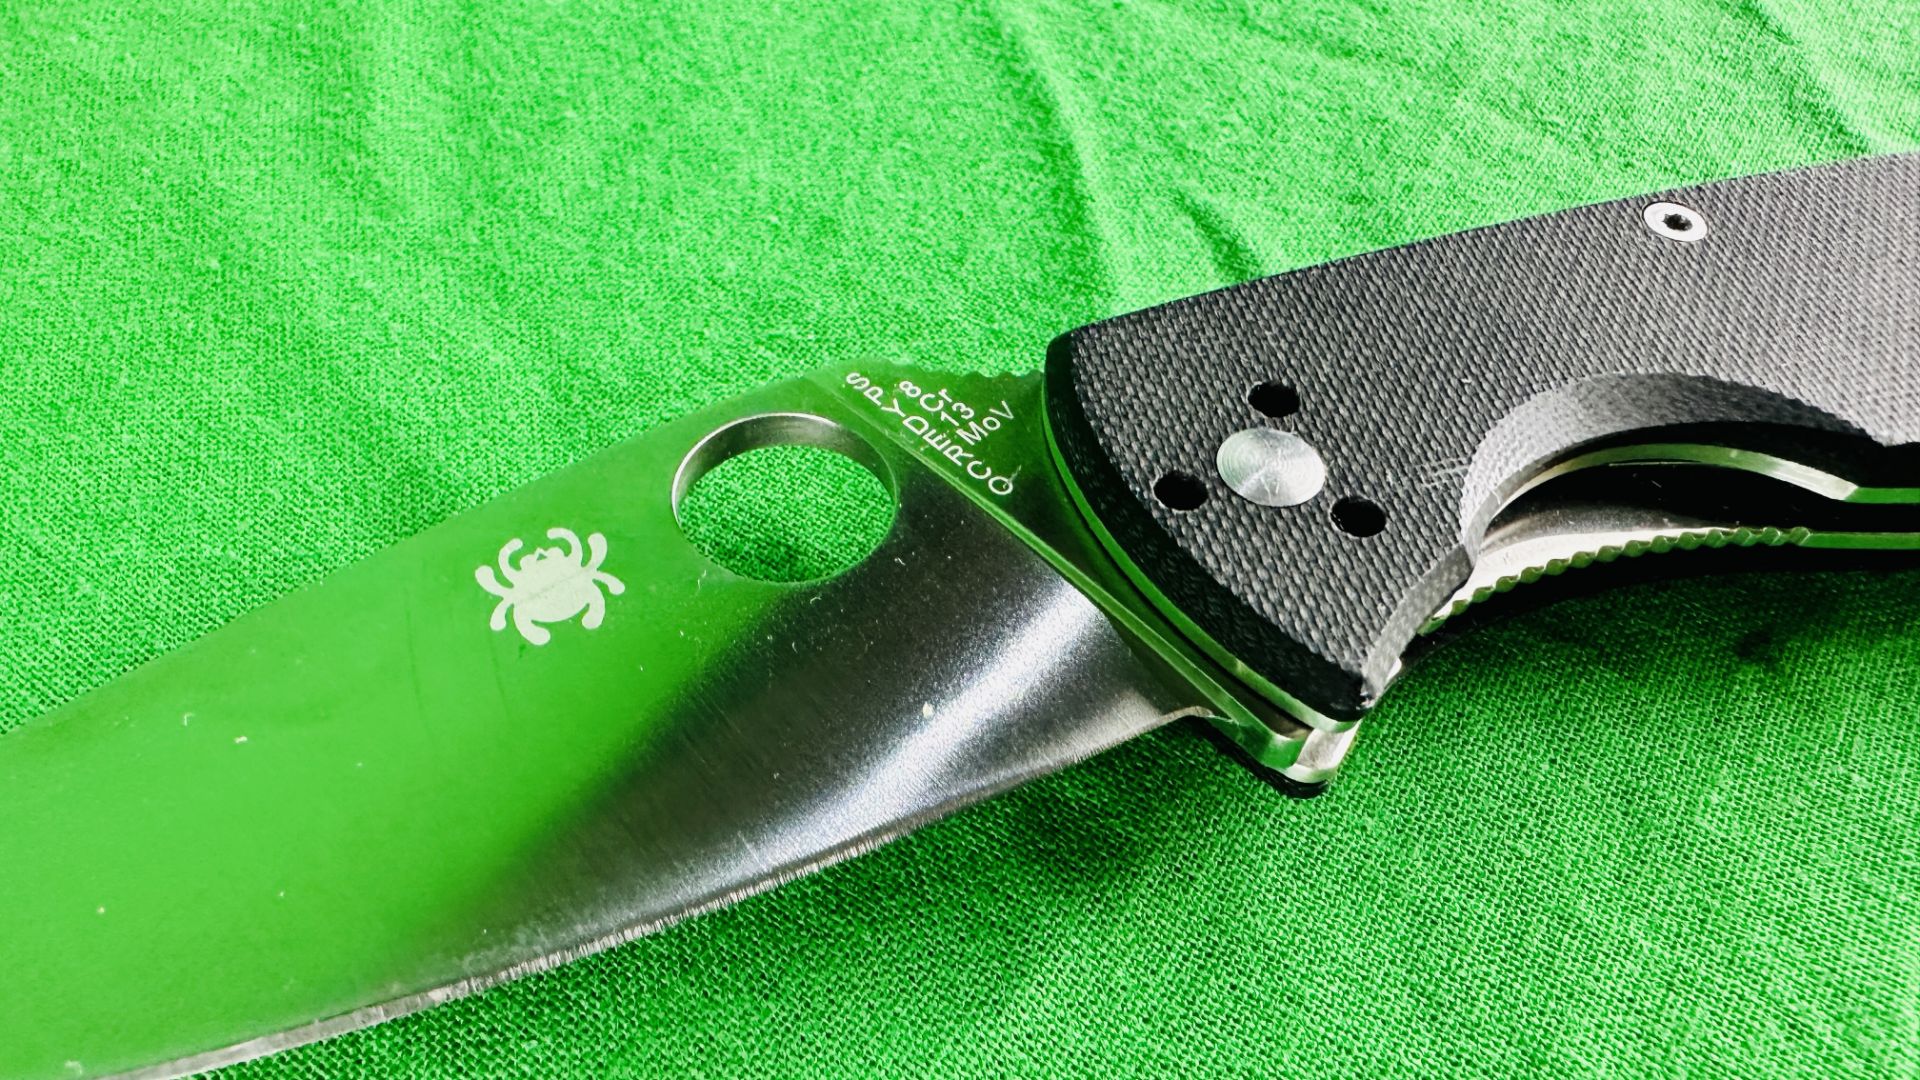 SPYDERCO TENACIOUS C122GP FOLDING POCKET LOCK KNIFE - NO POSTAGE OR PACKING AVAILABLE - Image 3 of 7